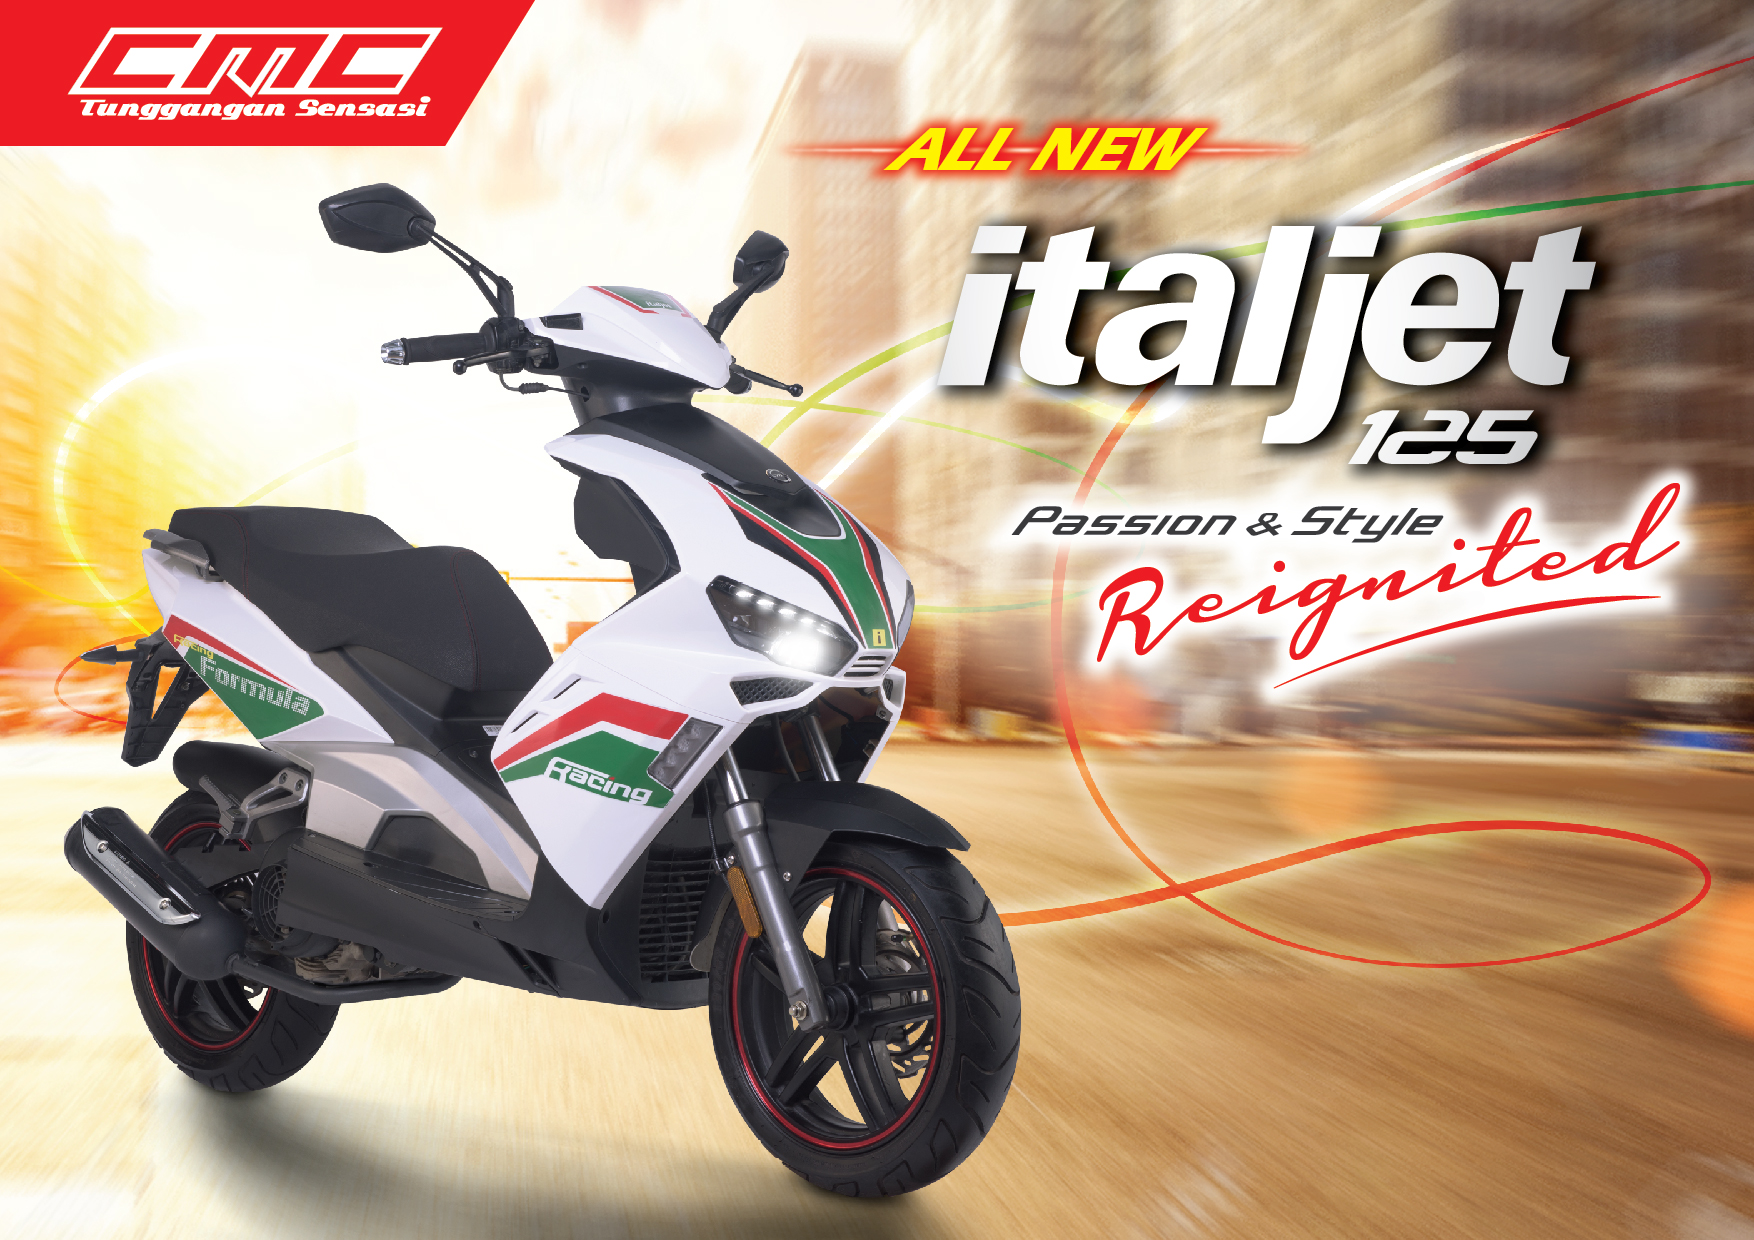 2016 CMC Italjet 125 scooter launched From RM6 996 